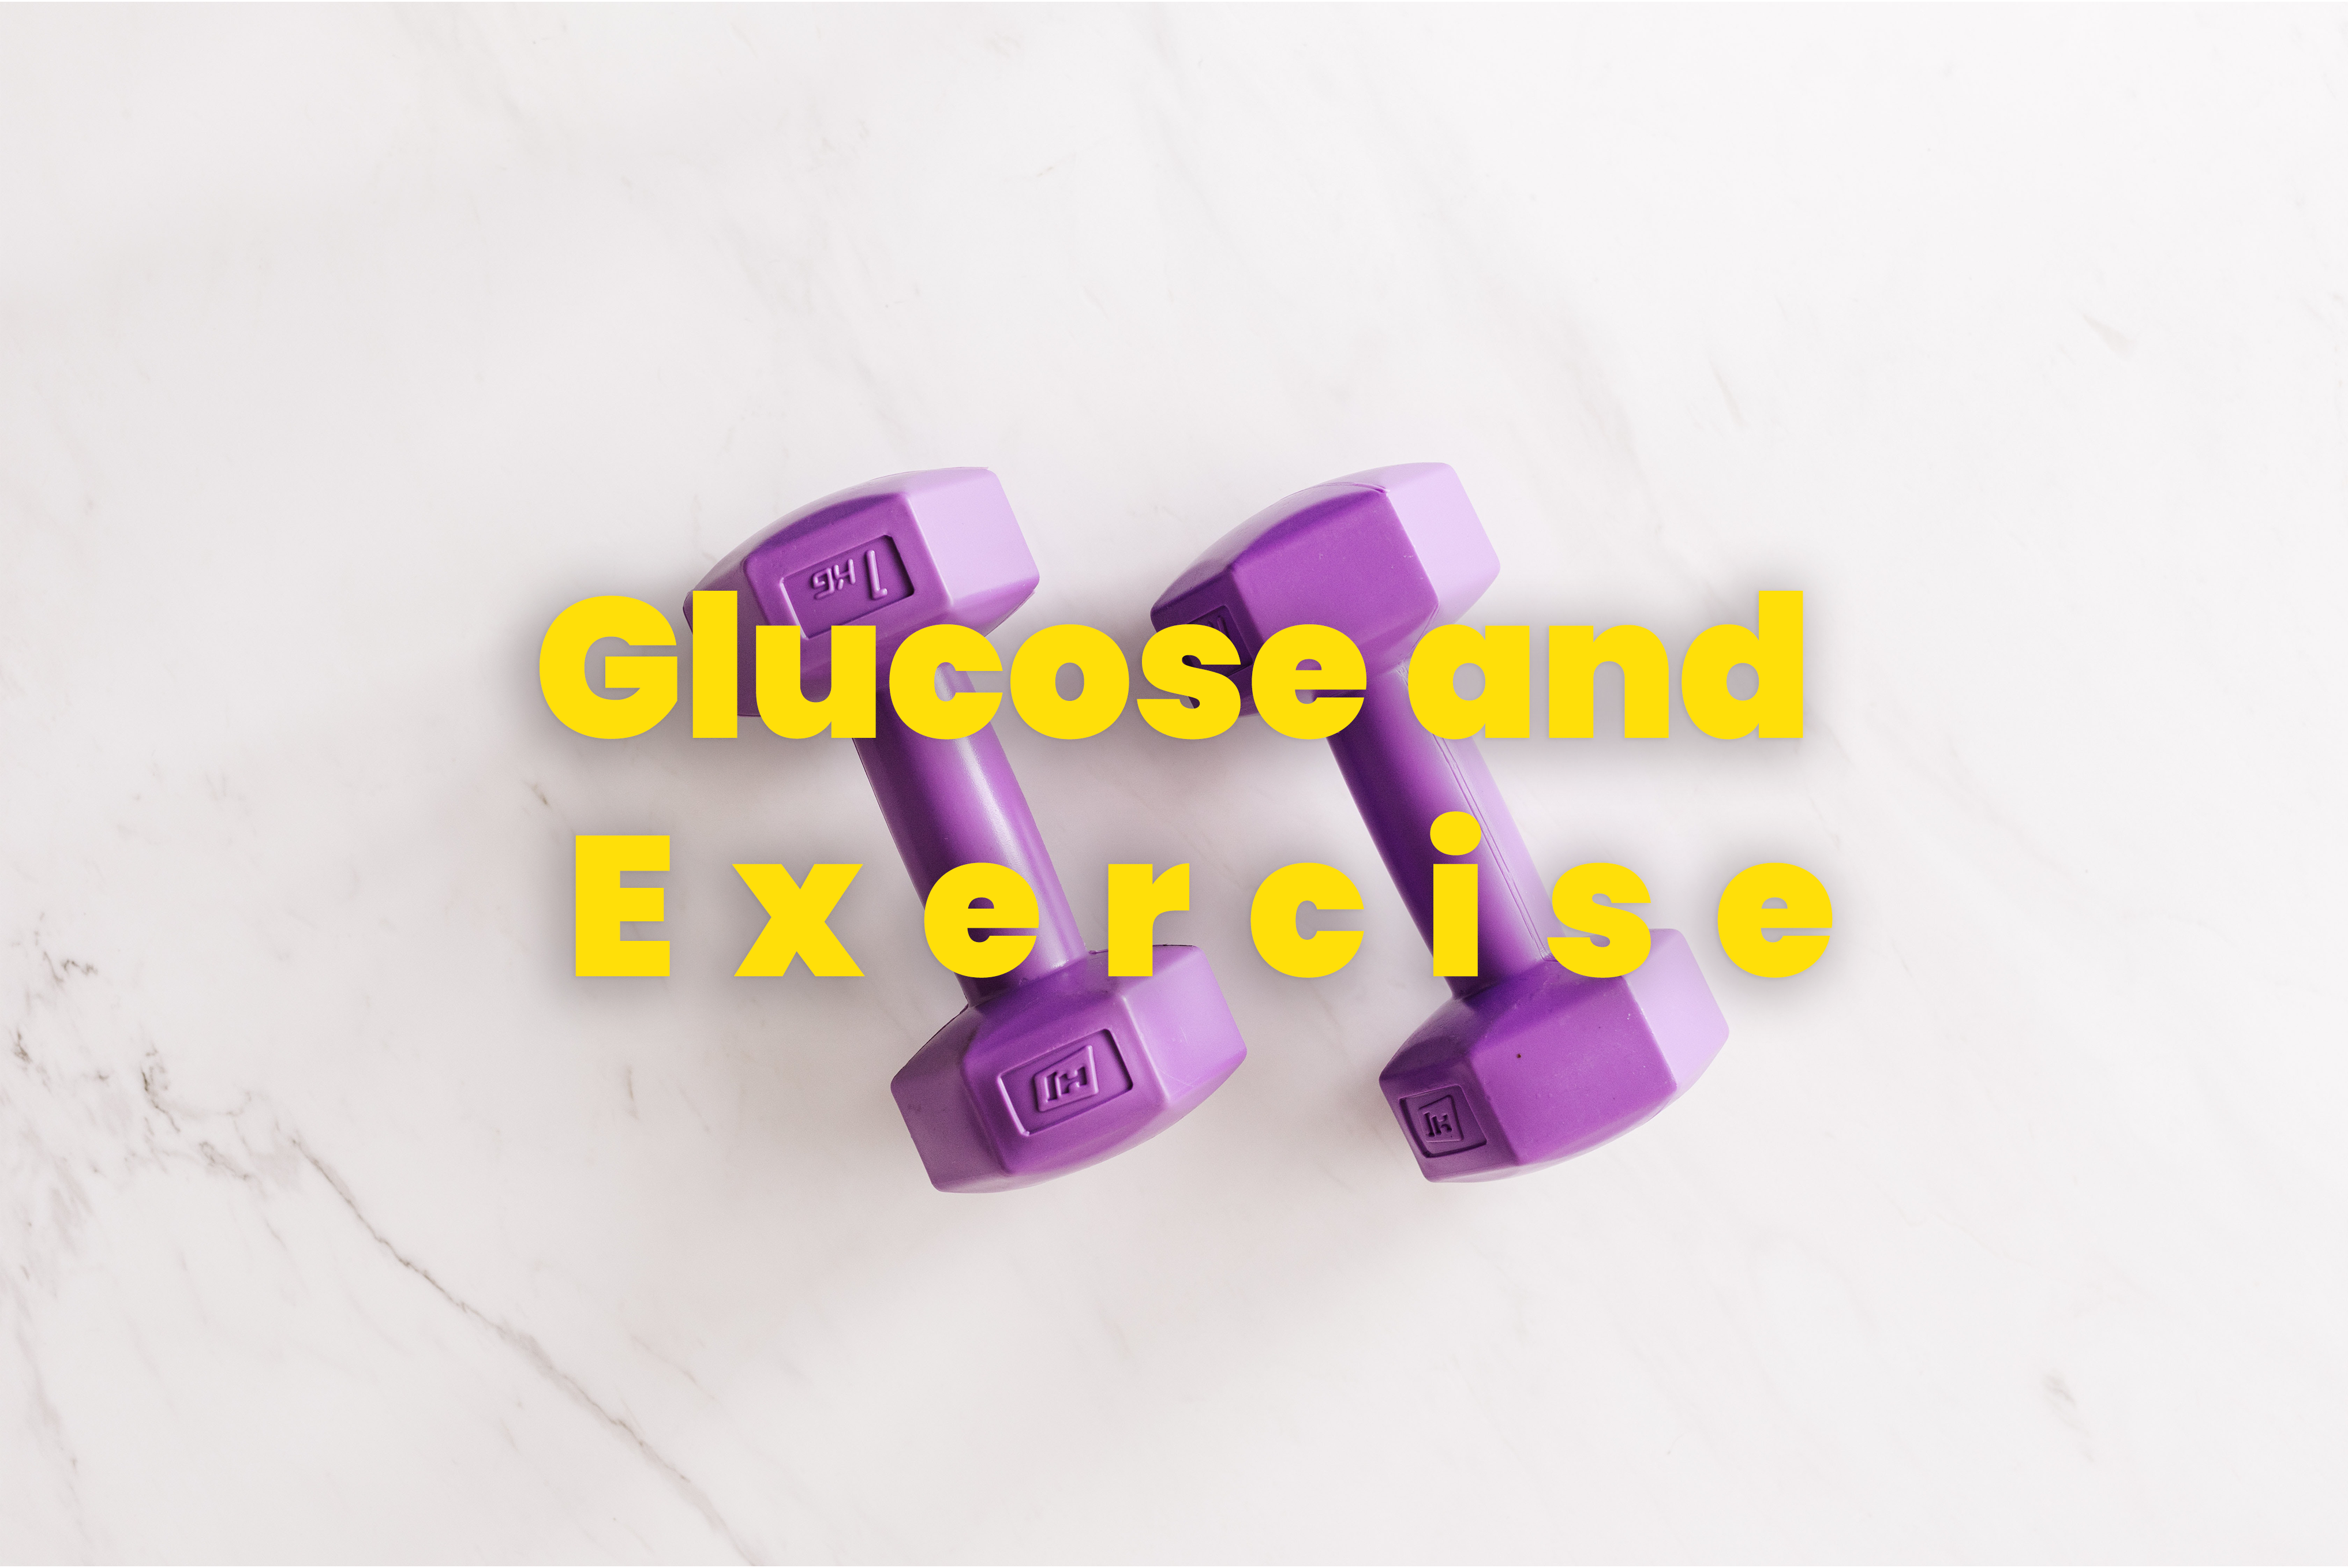 Glucose and Exercise